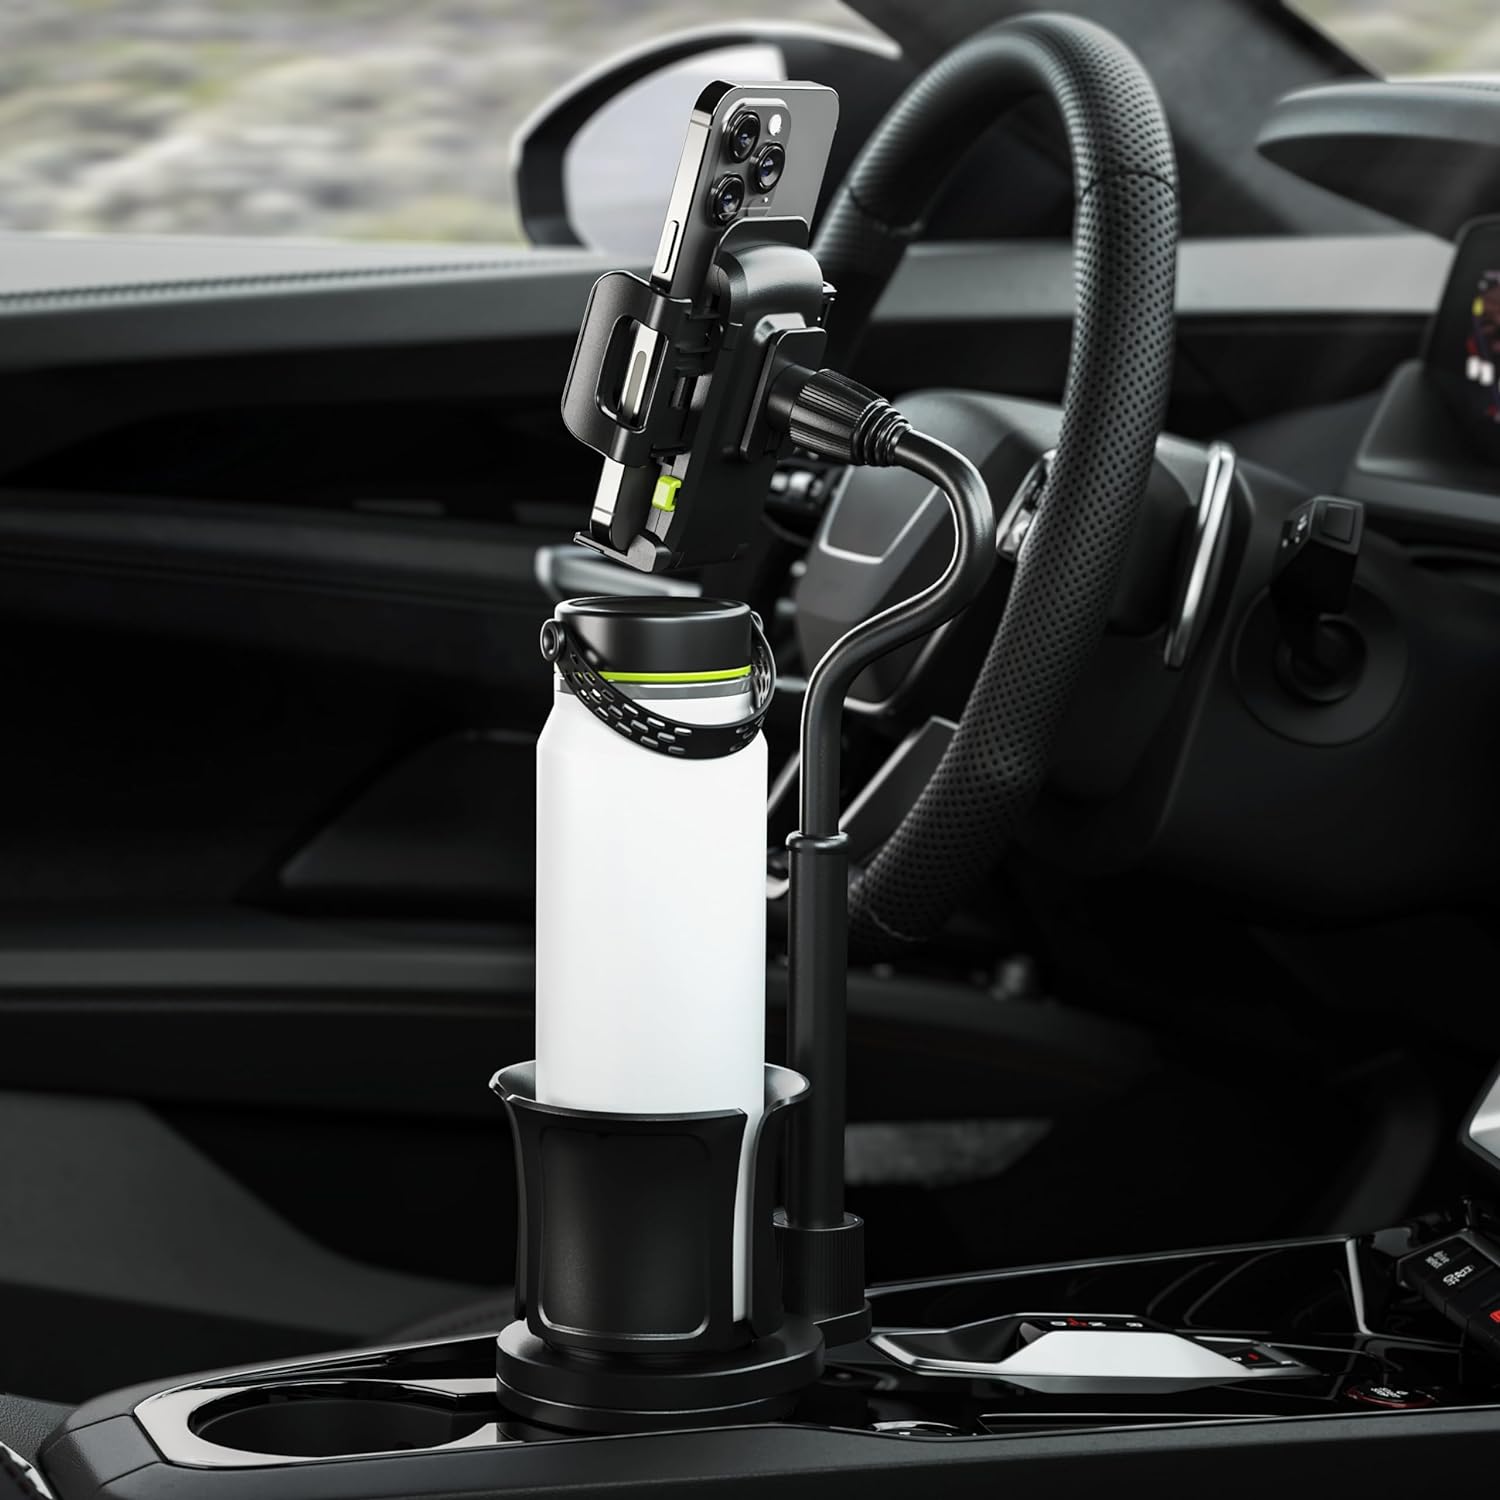 Bracketron Trip Grip Cup - Universal Cupholder Mount and Cup Expander